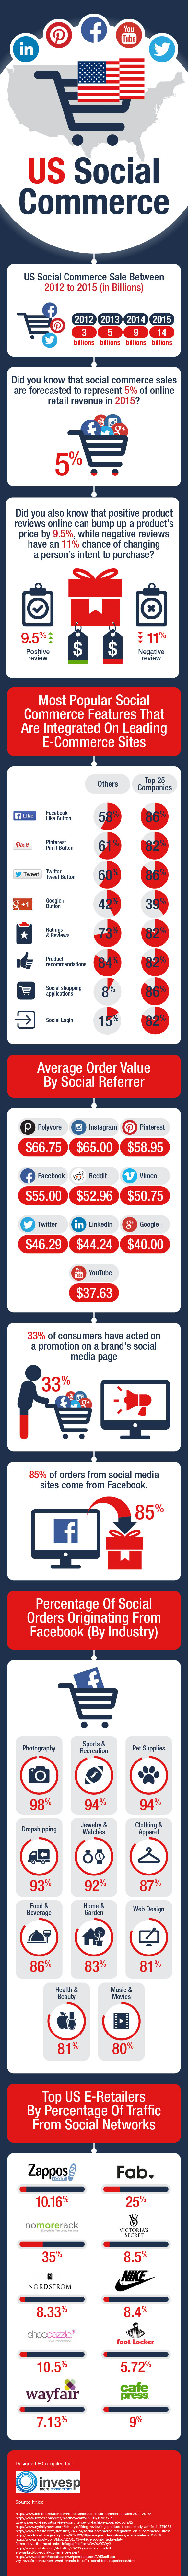 US Social Commerce â€“ Statistics and Trends Infographic | The ...